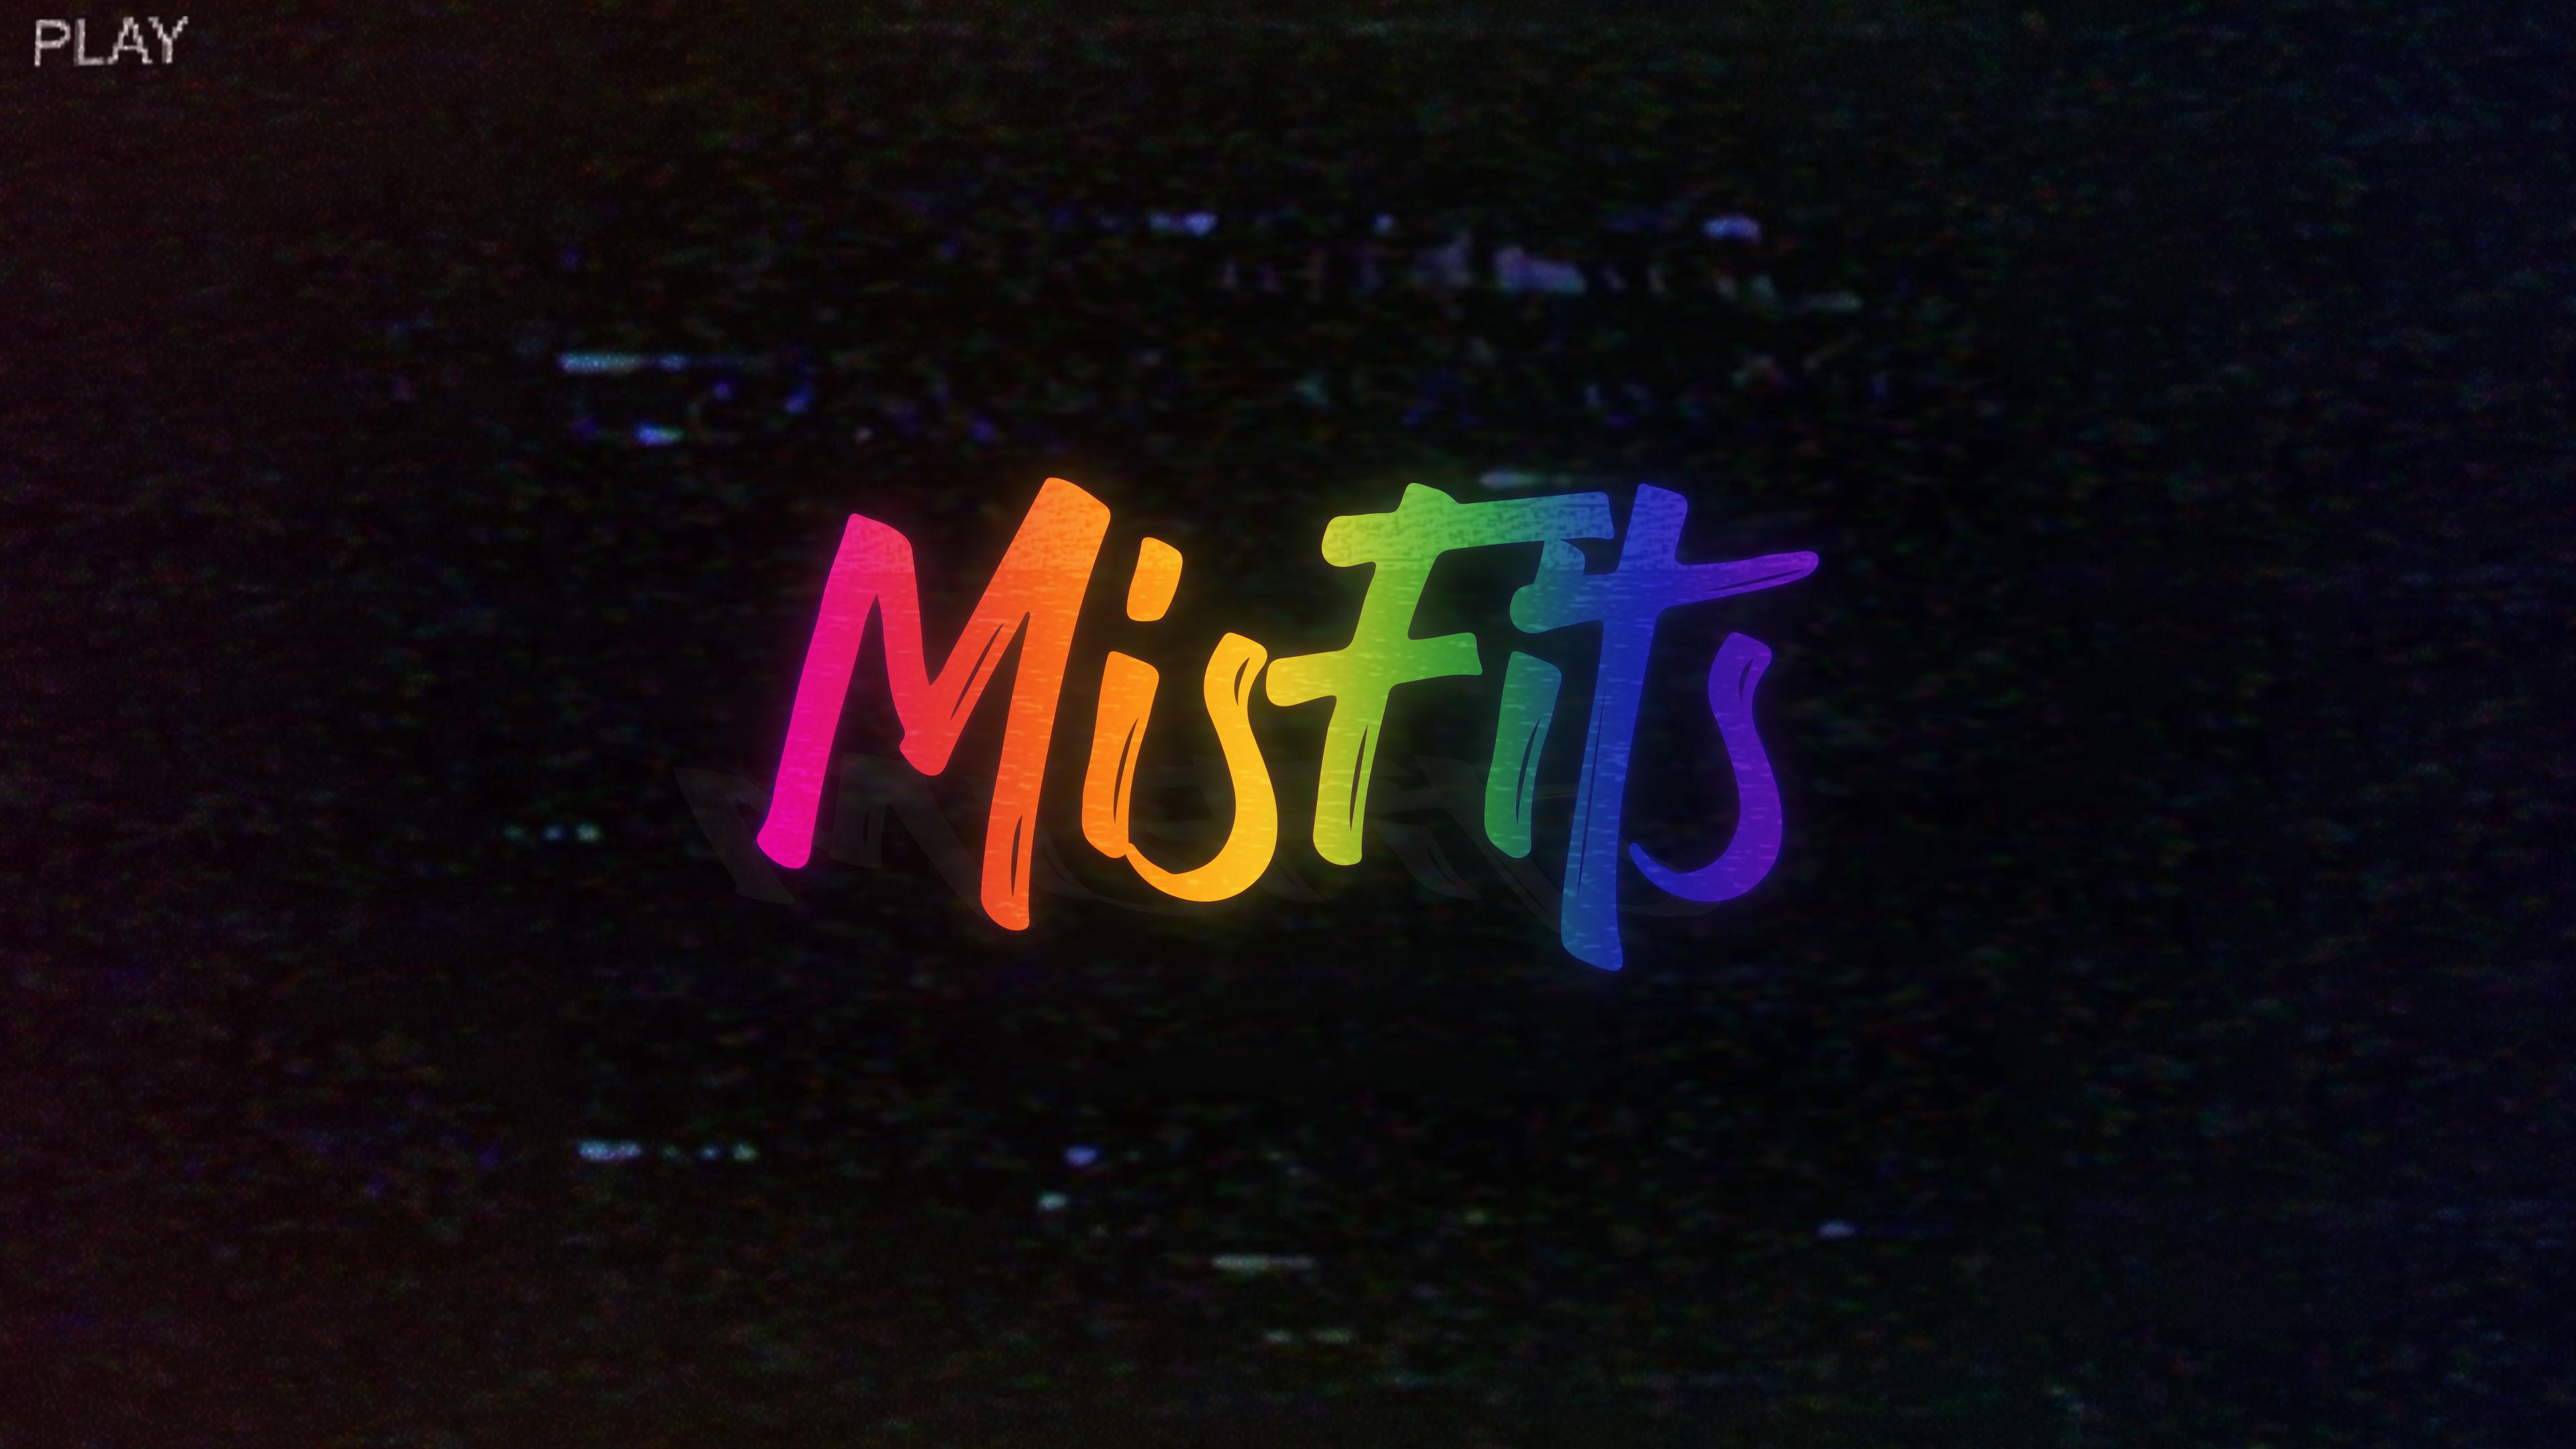 Misfits Podcast Wallpapers - Top Free Misfits Podcast Backgrounds